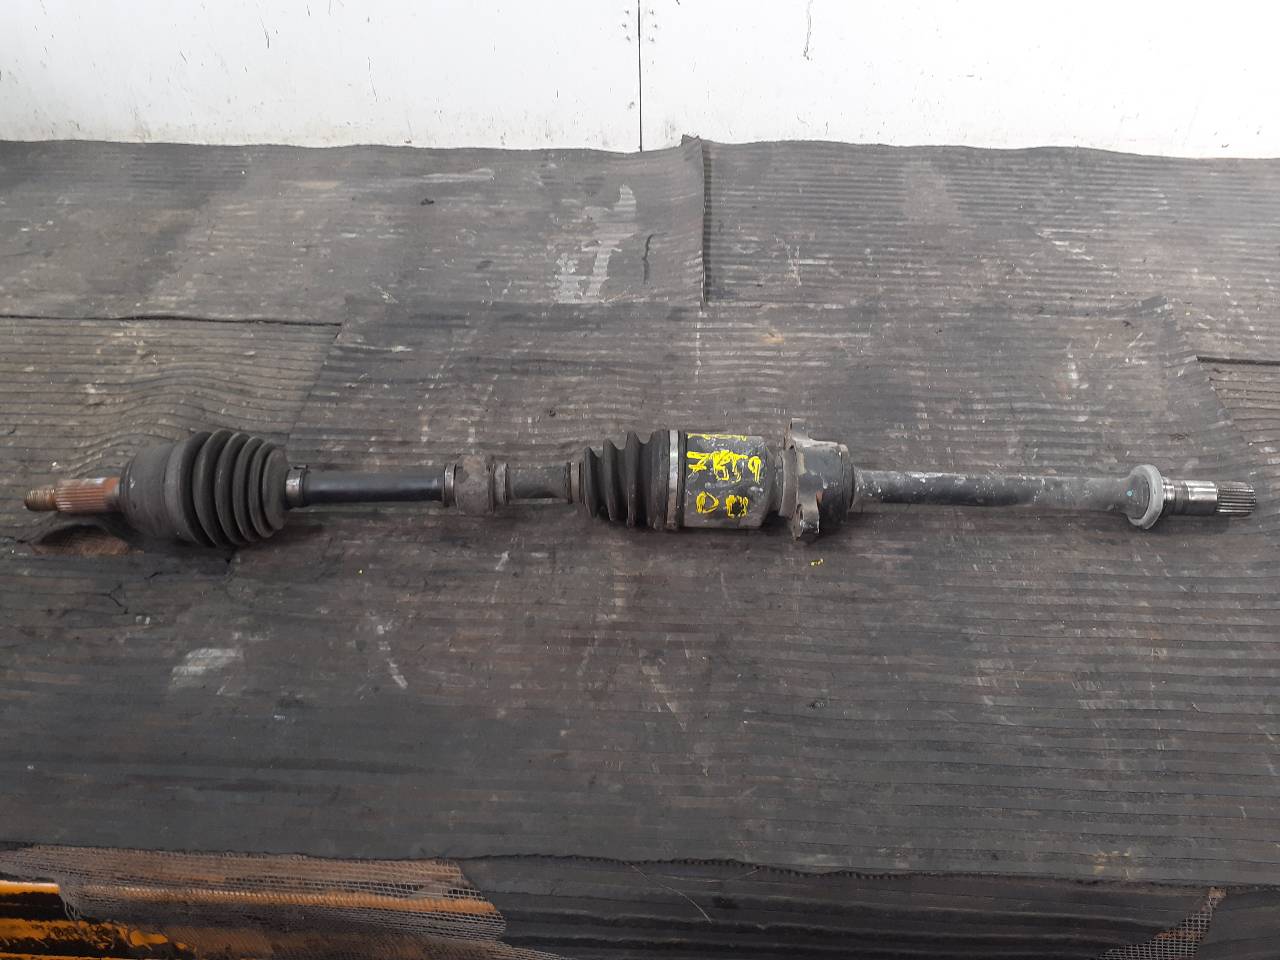 MAZDA 6 GH (2007-2013) Front Right Driveshaft GD752550XC, P1-B6-19 18614390